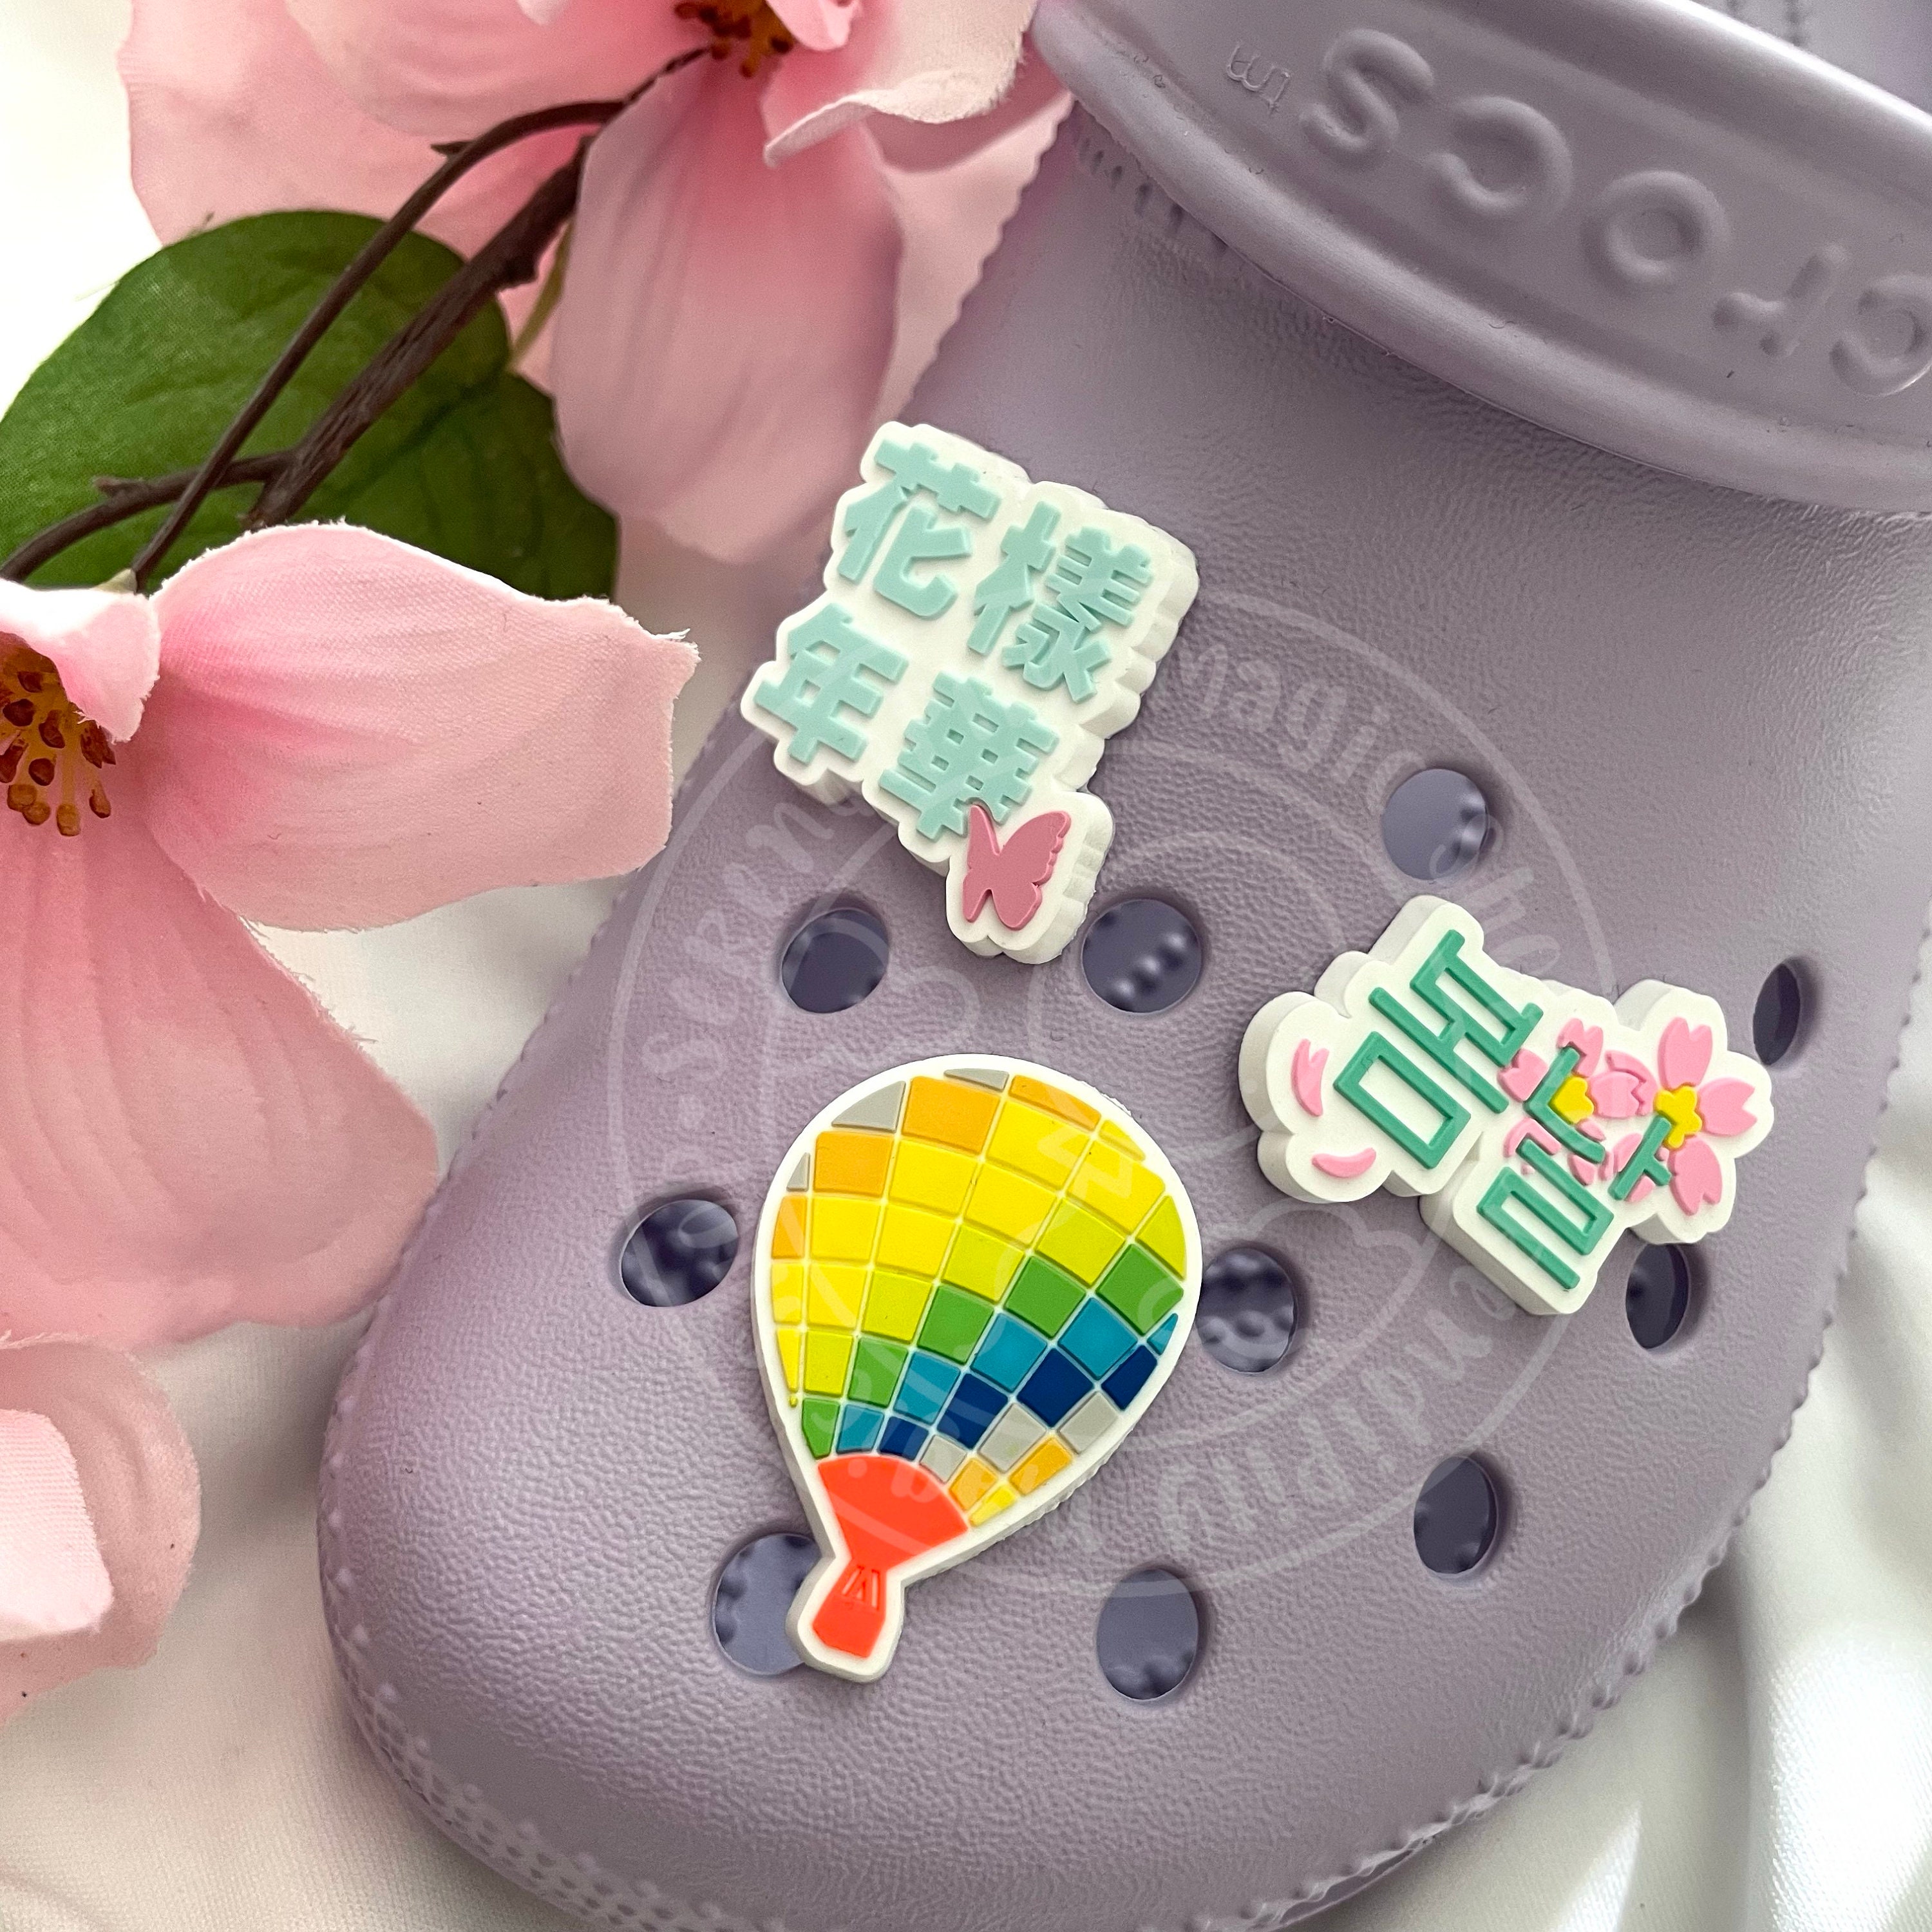 Bt21 Croc Charms, Cute, Kpop Charms, Shoe Decorations, BTS Croc Charms all  Pieces in the Image -  Norway